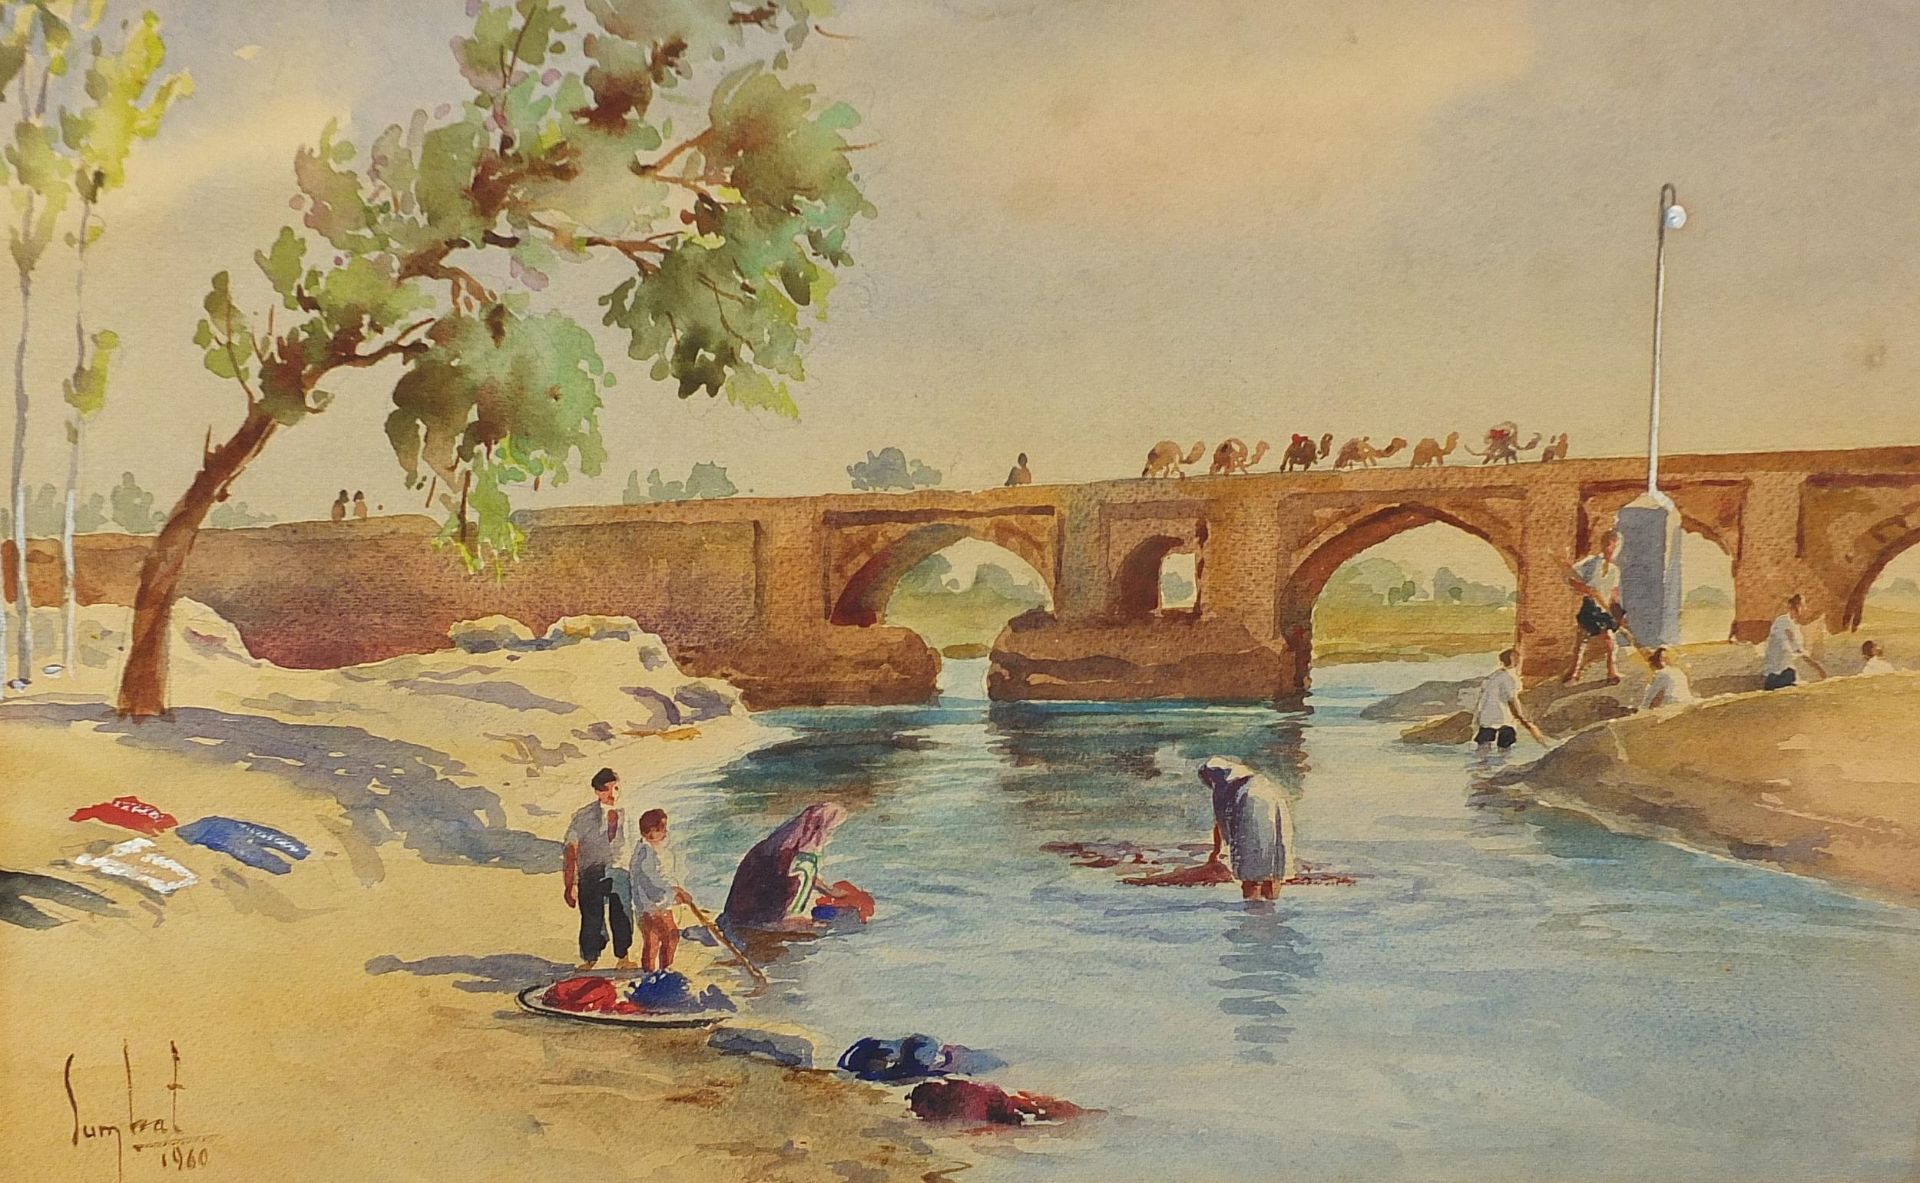 Sumbat Kureghian - River scene with camels and figures, Iranian heightened watercolour on card,